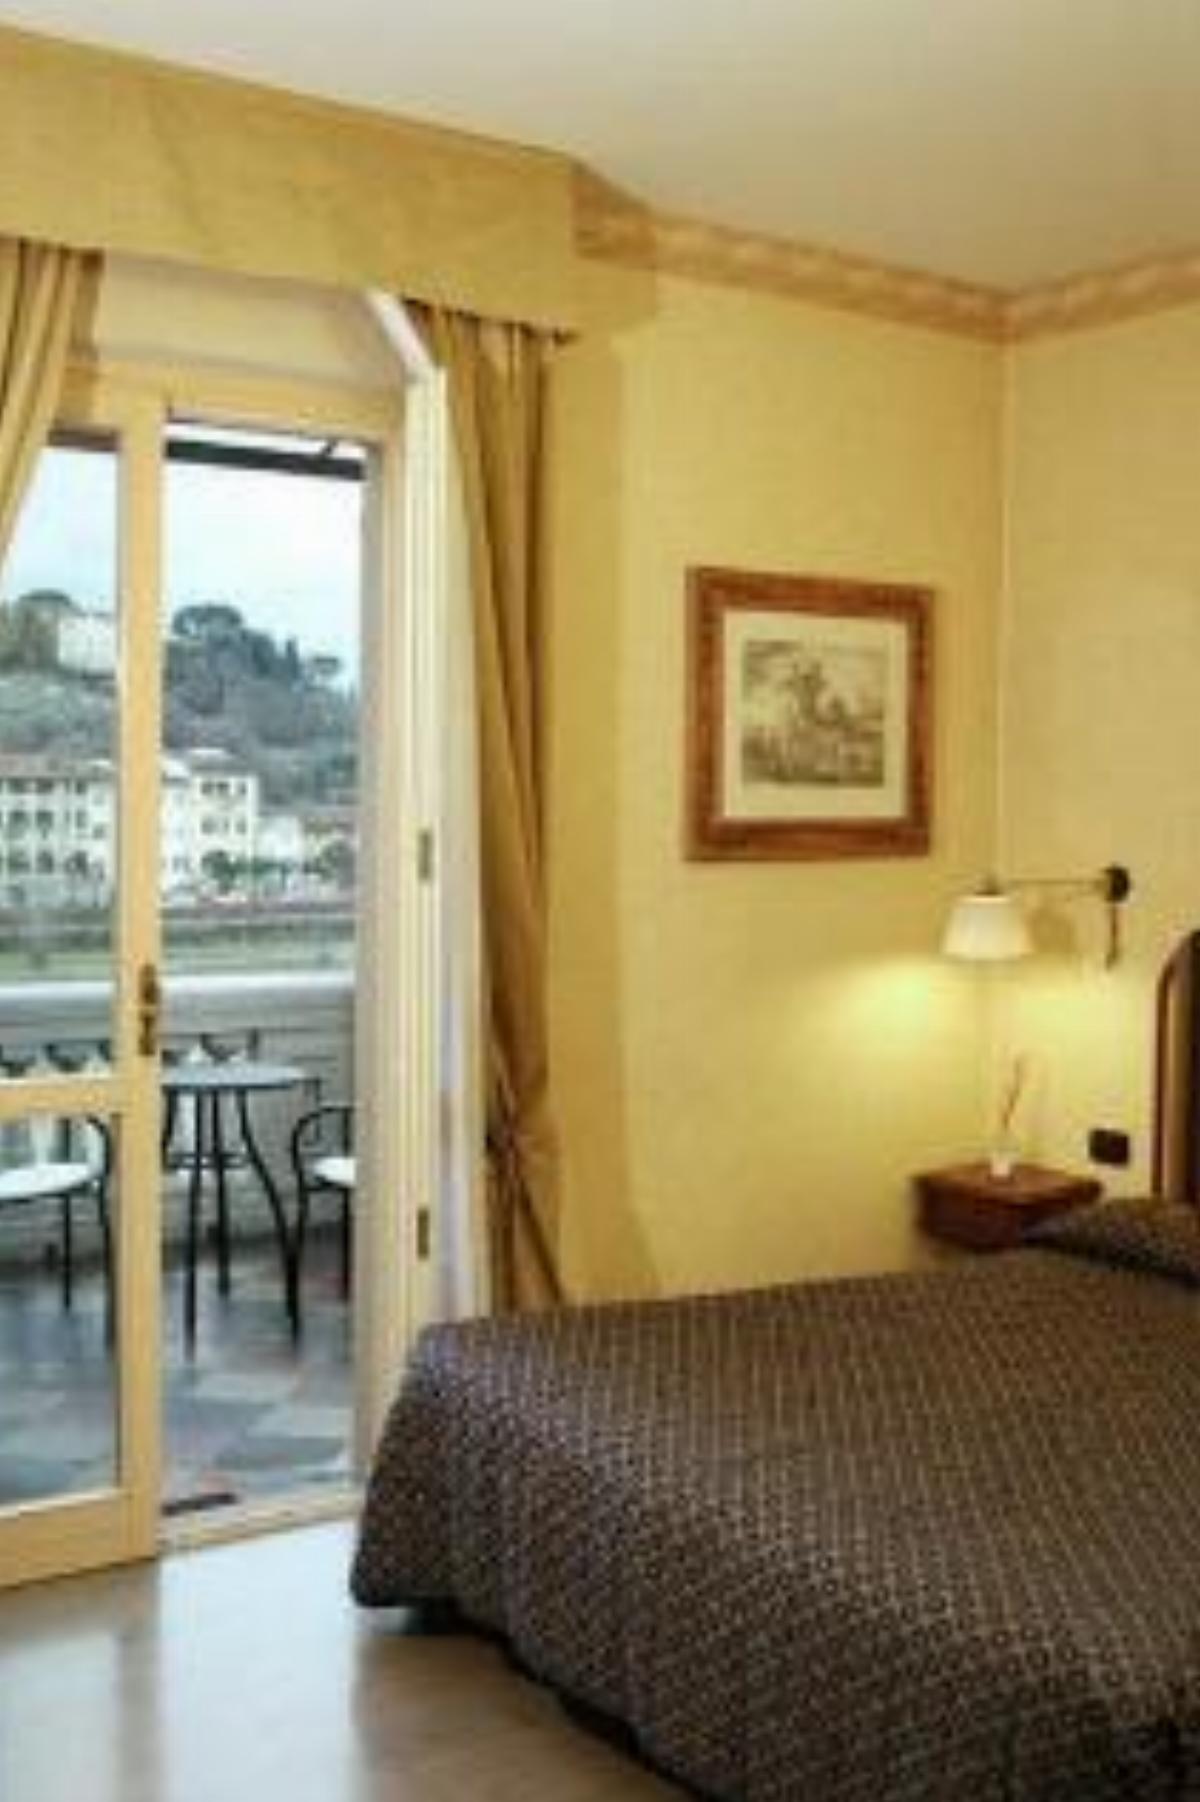 LHP Hotel River Hotel Florence Italy